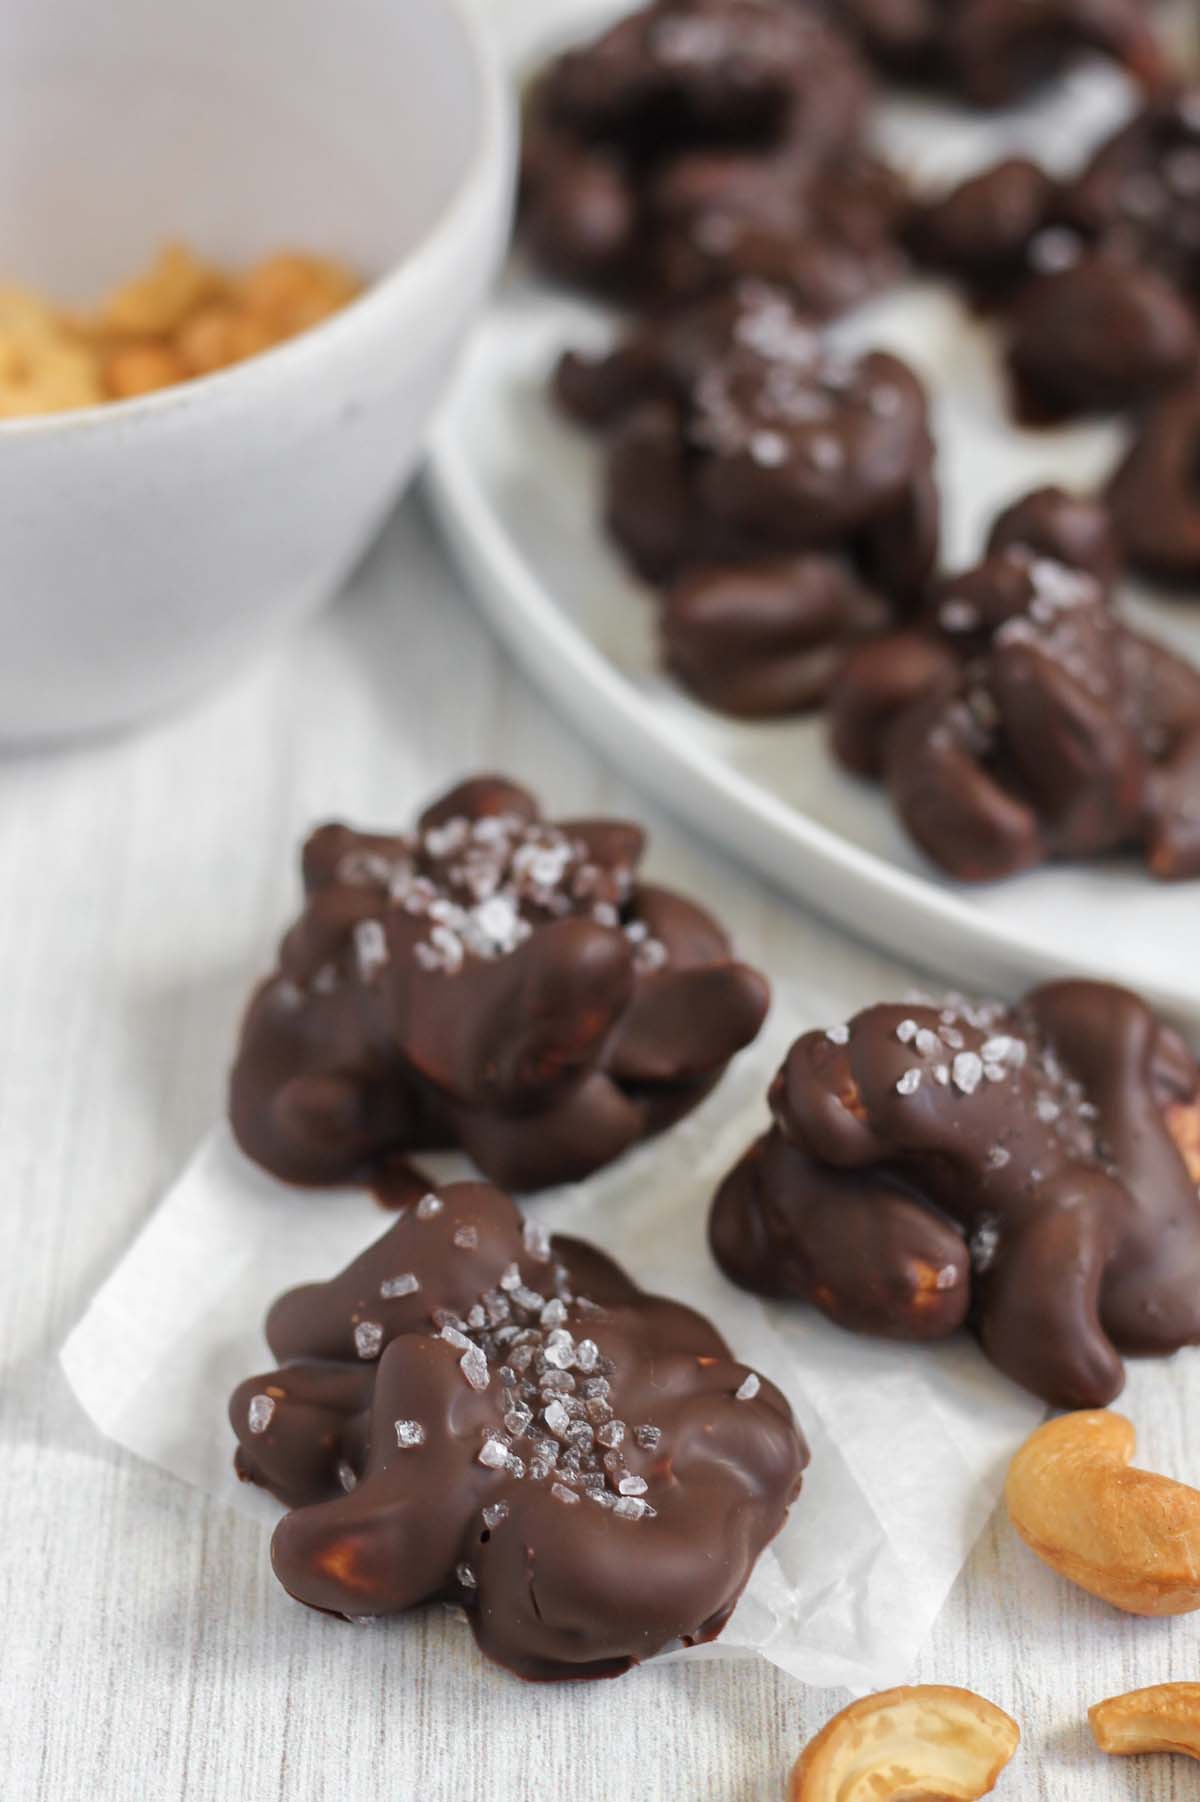 Three chocolate covered cashew clusters topped with sea salt with more cashew clusters in the background.